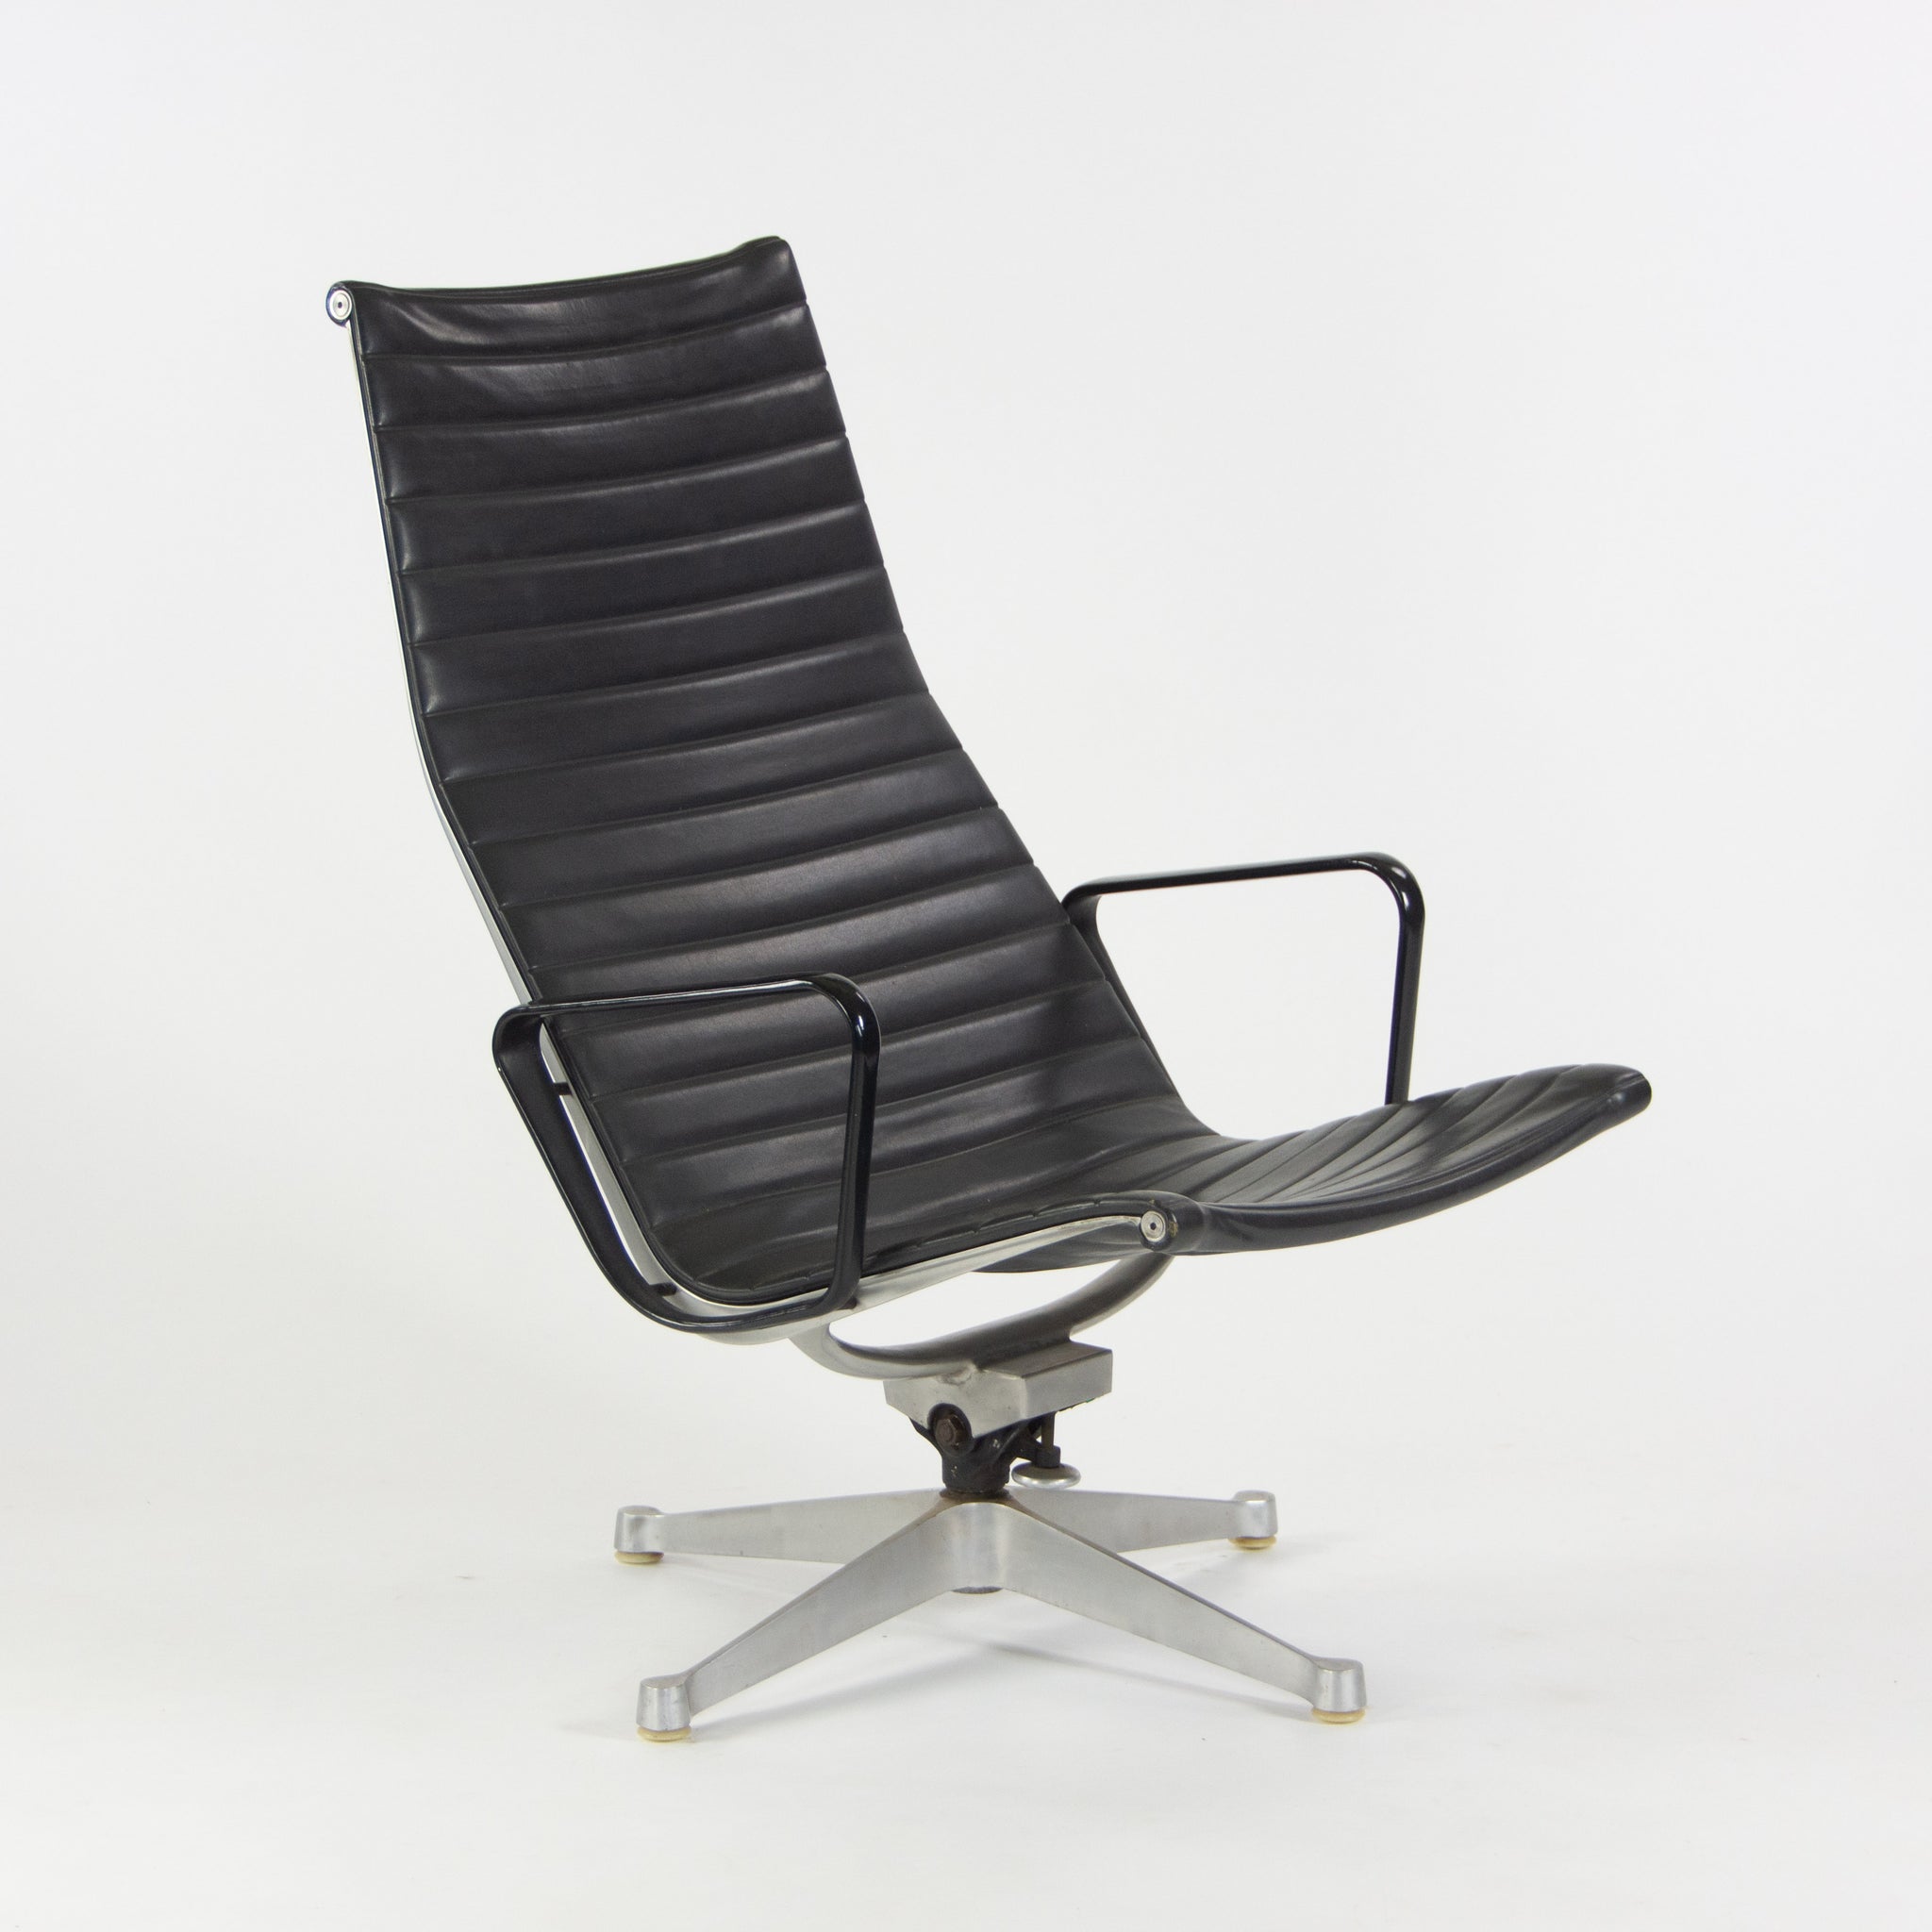 SOLD 1958 Patent Pending Eames Herman Miller Aluminum Group Lounge Chair Charcoal